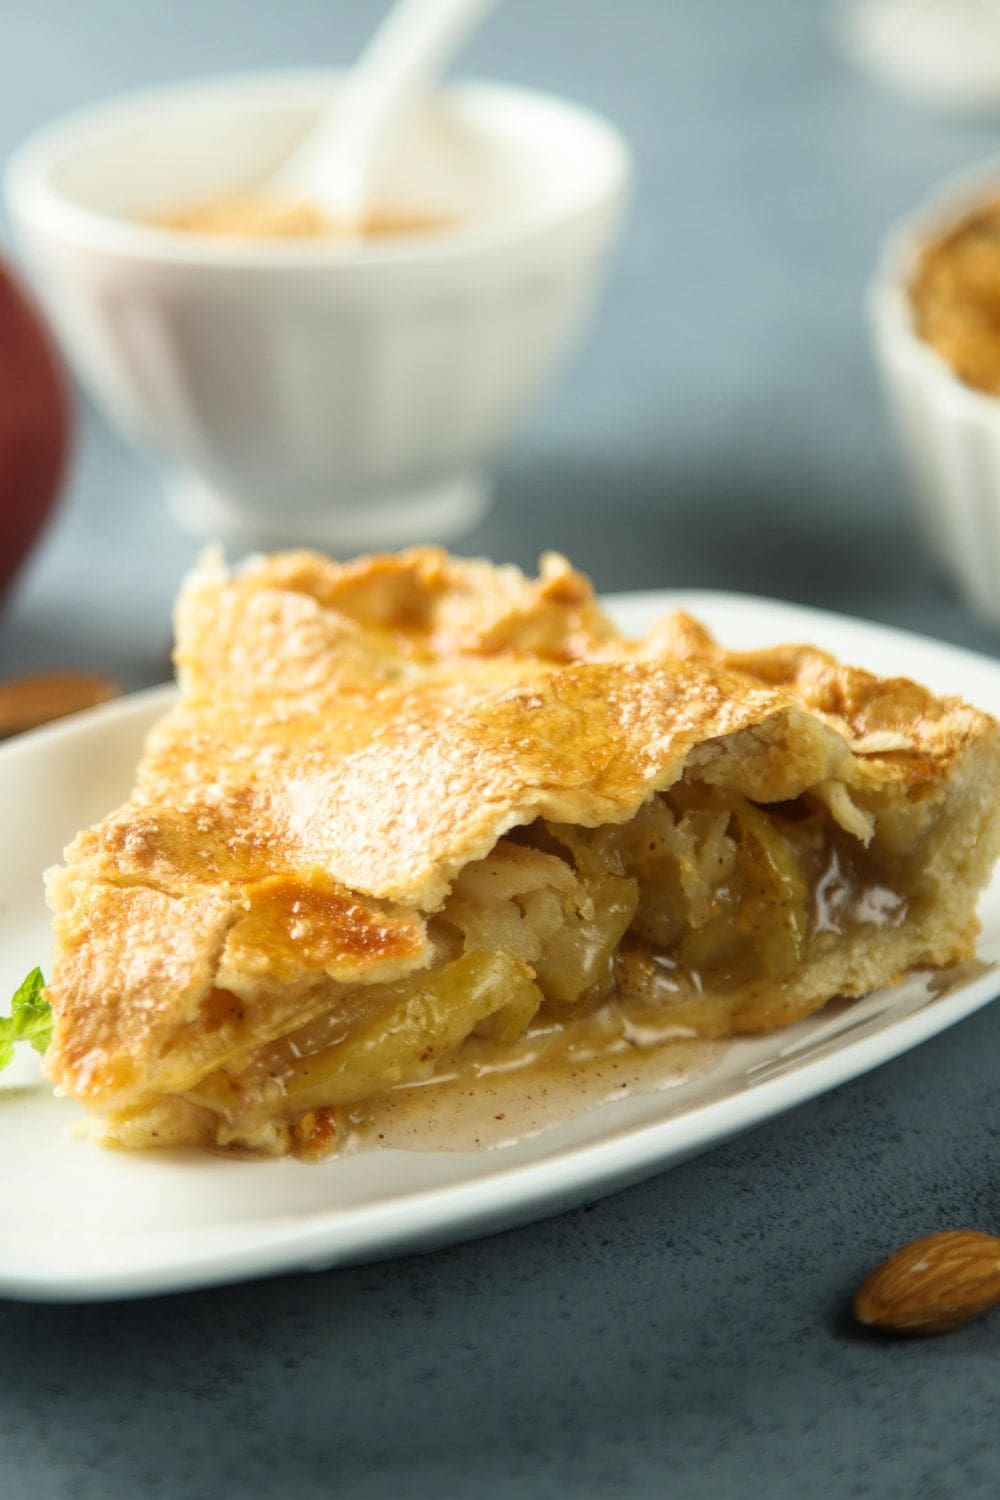 10 Easy Recipes with Apple Pie Filling (Besides Pie). Shown in picture: A Slice of Homemade Apple Pie